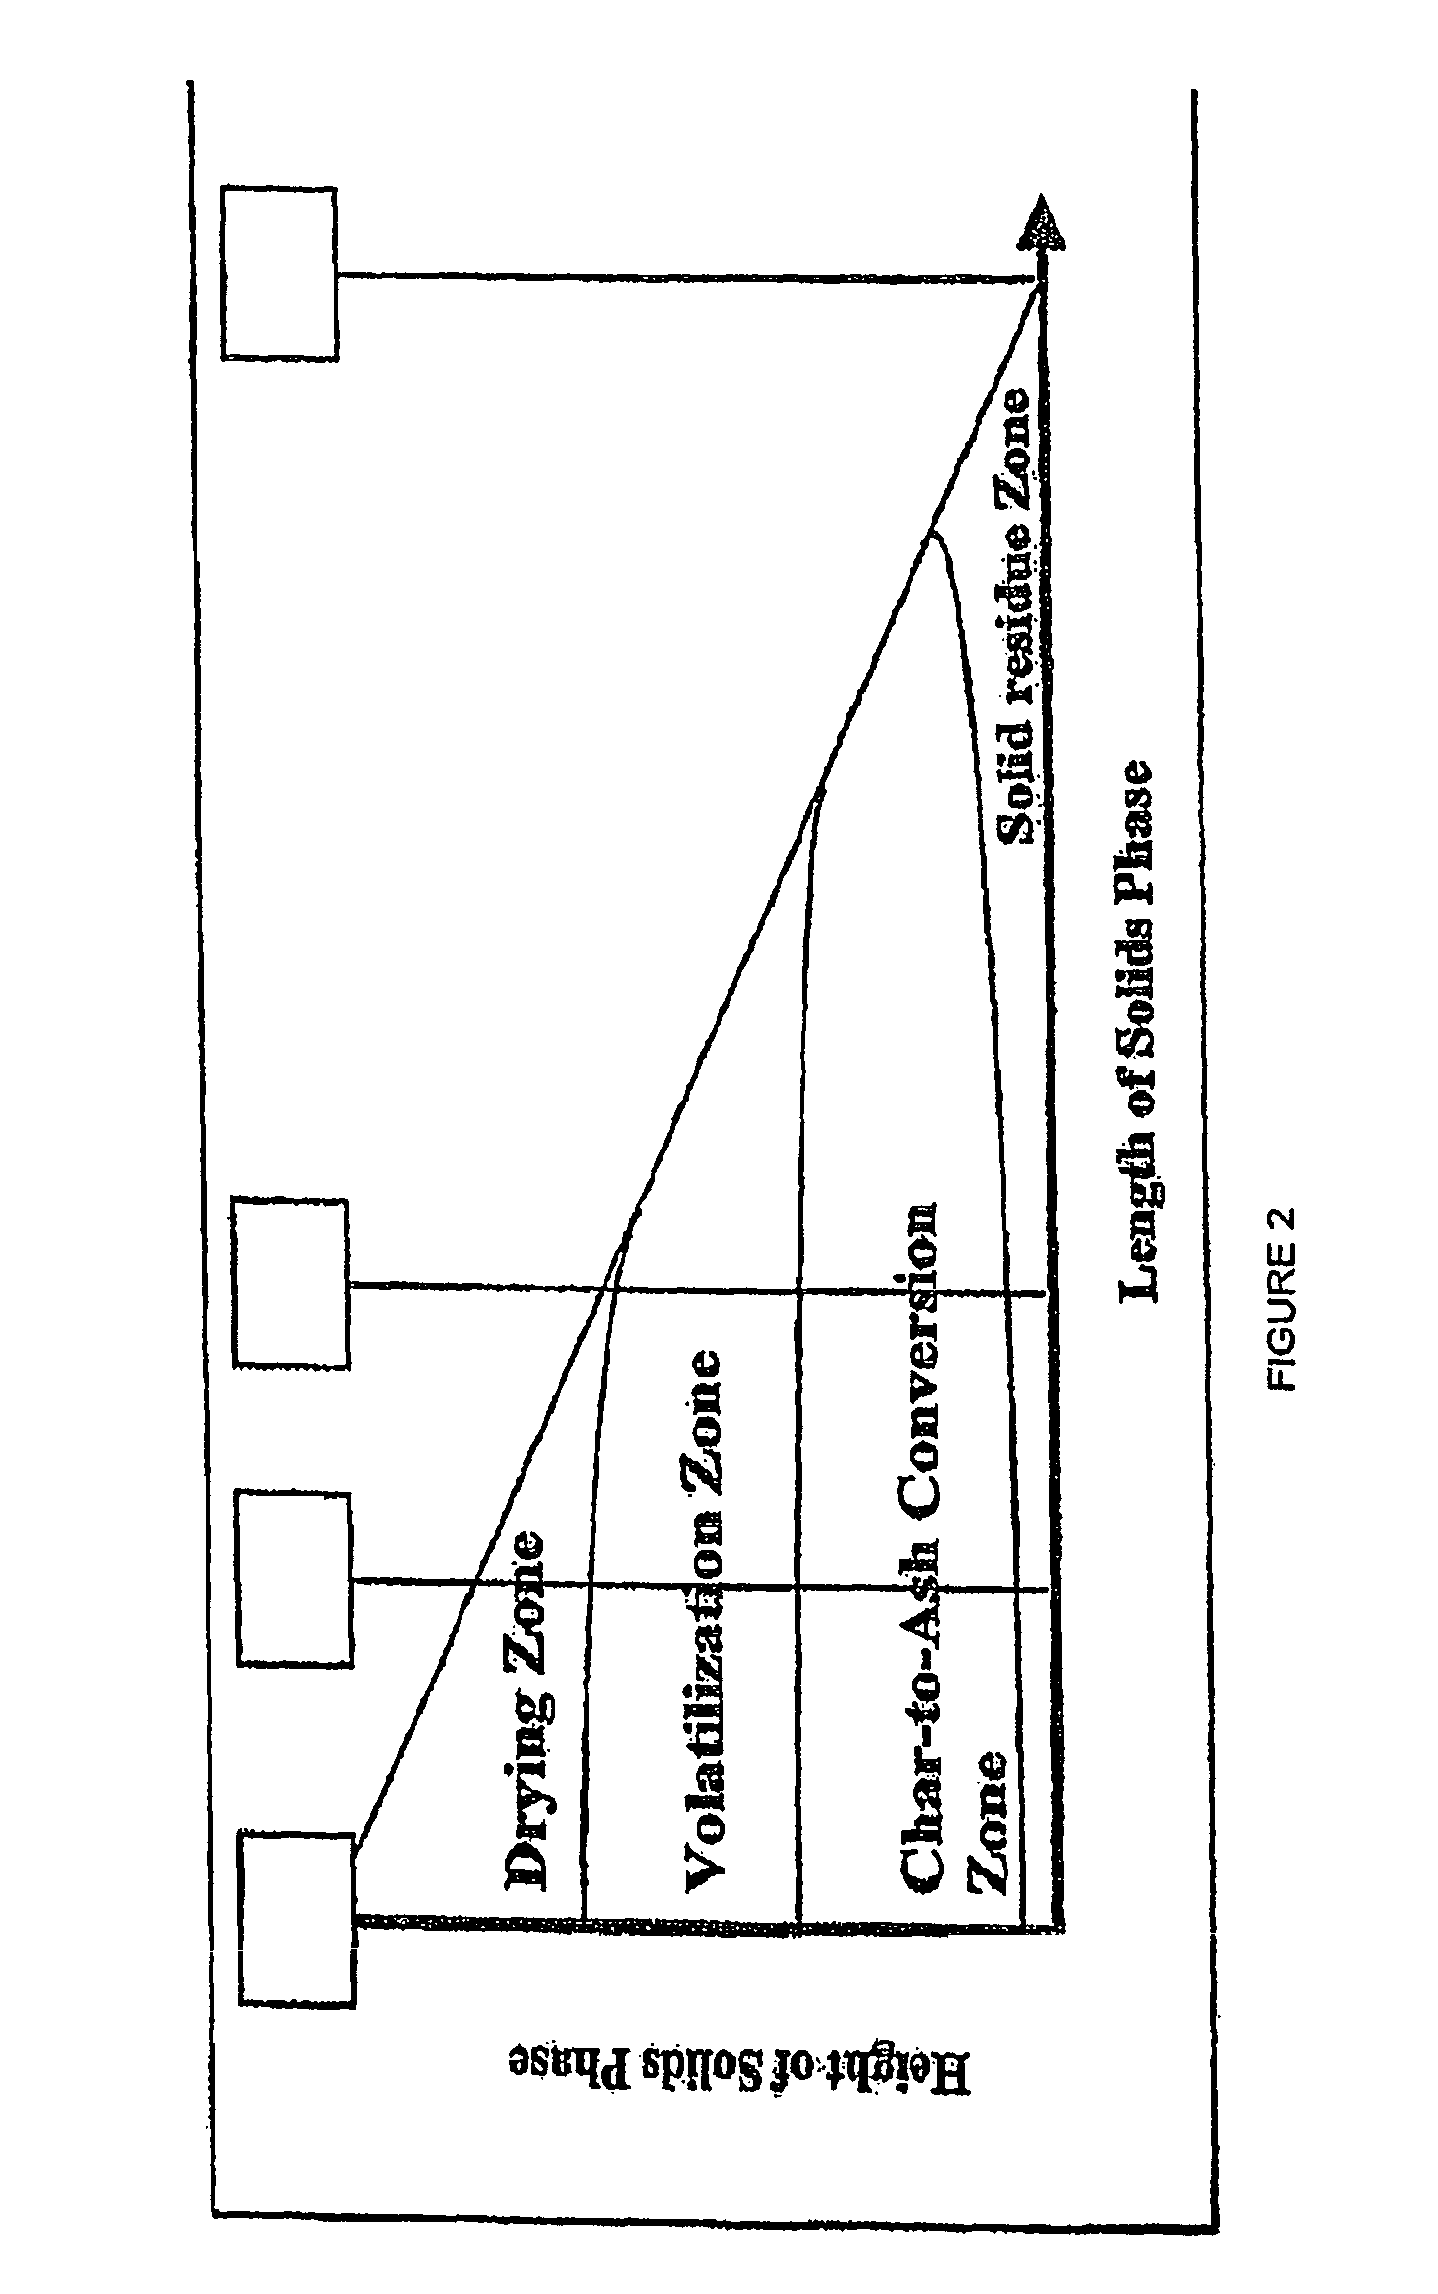 Low temperature gasification facility with a horizontally oriented gasifier